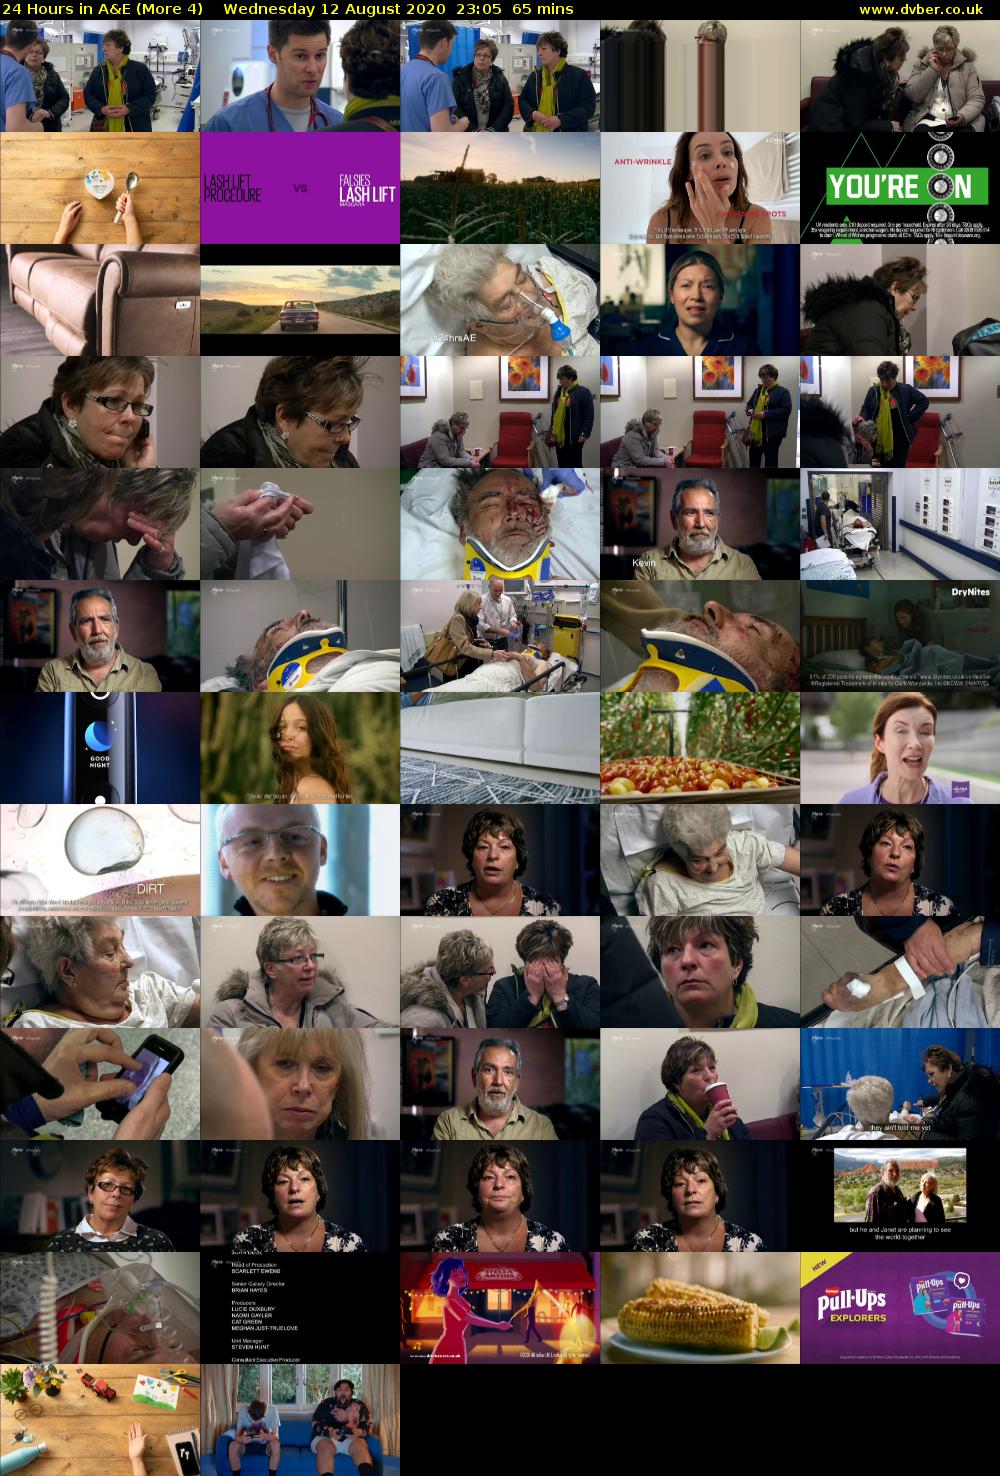 24 Hours in A&E (More 4) Wednesday 12 August 2020 23:05 - 00:10